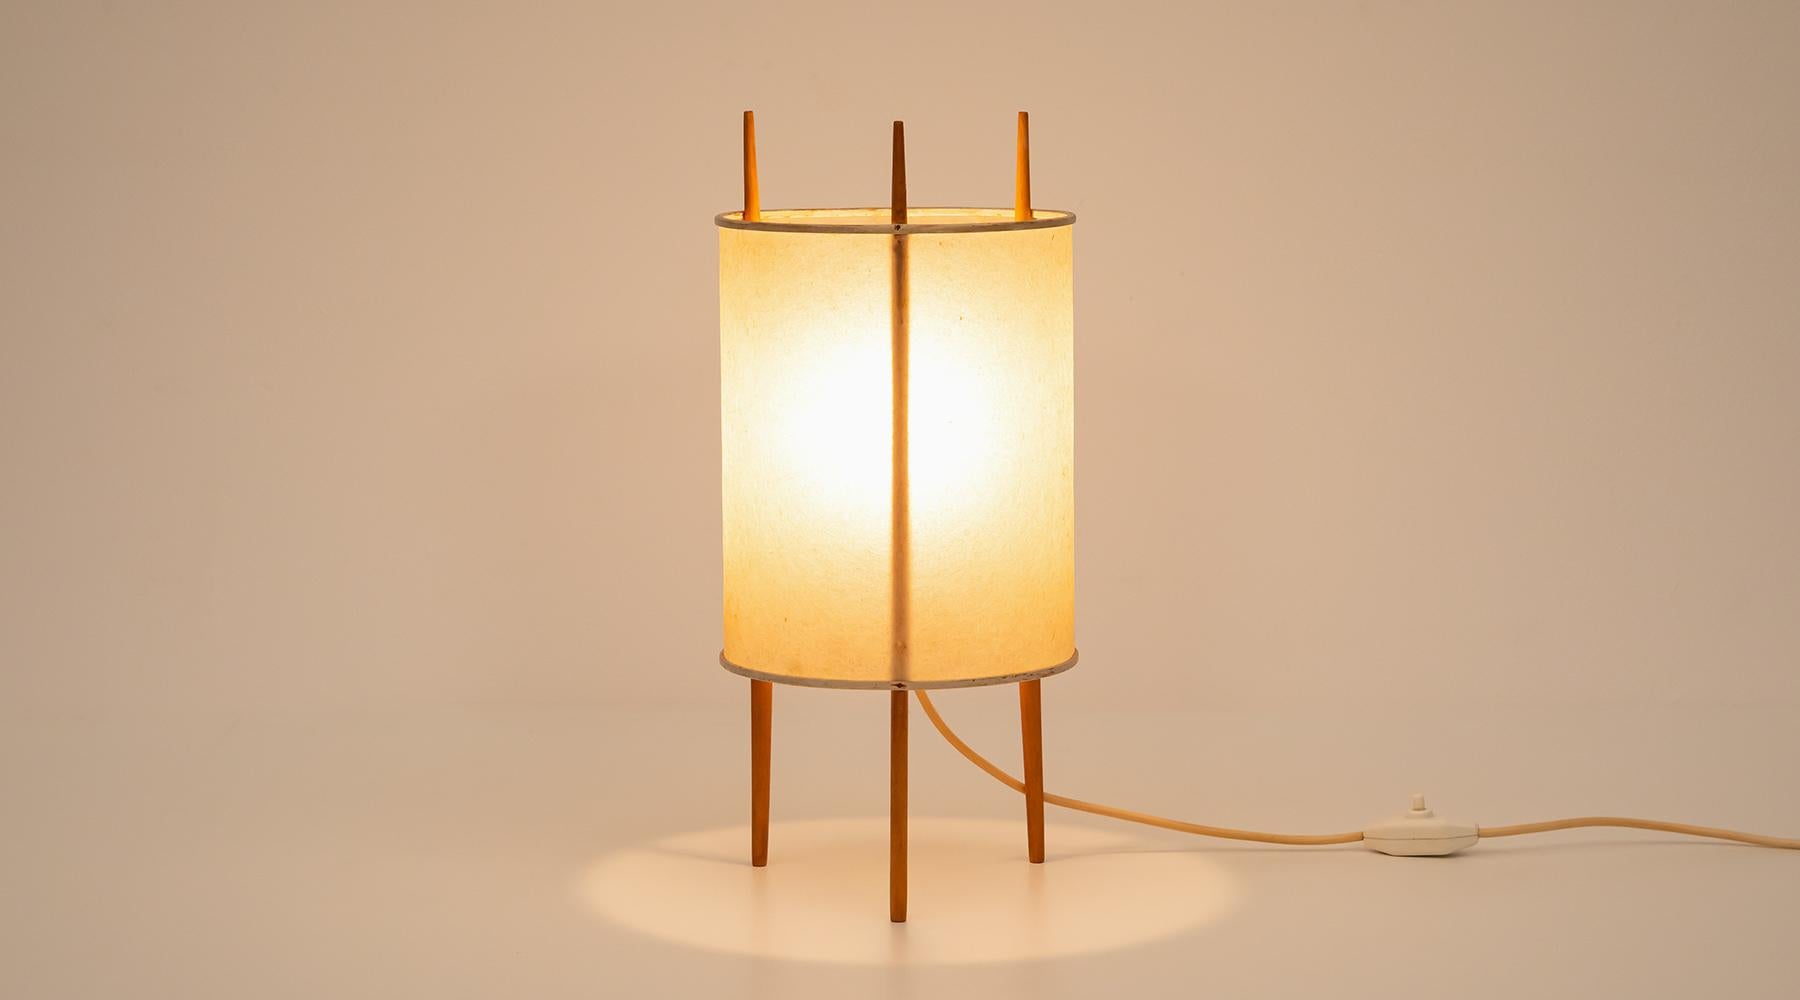 Three-leg table lamp, Isamu Noguchi for Knoll International, USA, 1947.

Three-legged Cylinder table lamp by Isamu Noguchi. The shade is made out of Fiberglas-reinforced polyvinyl and stands on three cherry sticks. The lamp promises a very warm,